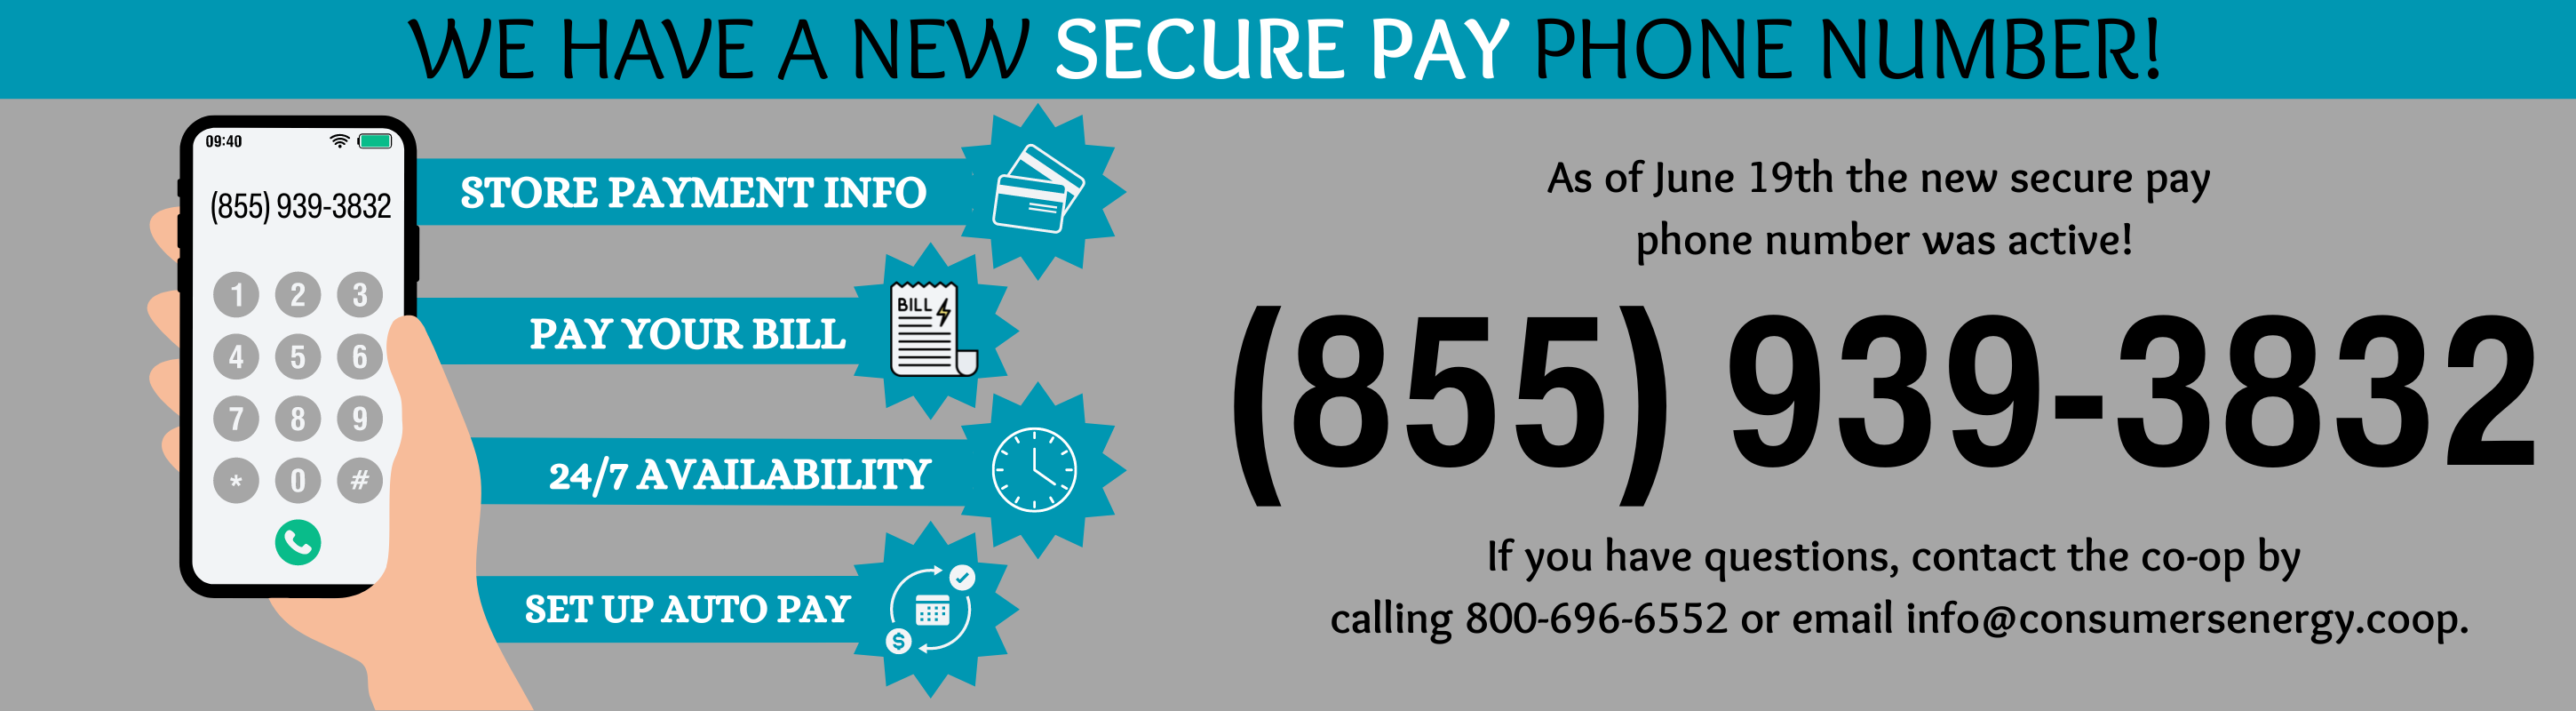 New Secure Pay Phone Number